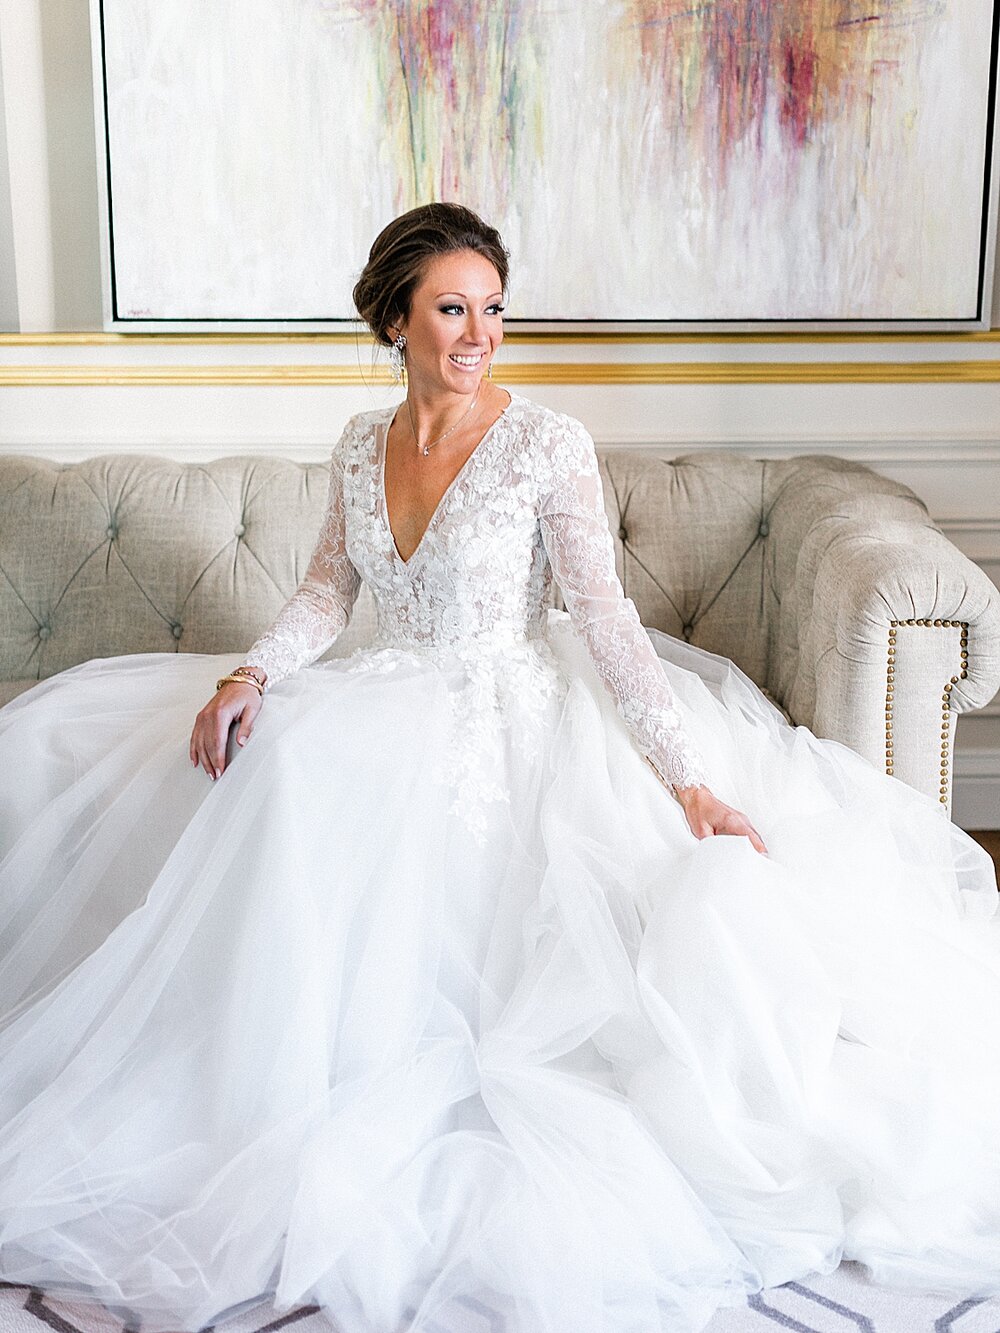 bridal portrait on couch at St. Regis Hotel | Tri-State area wedding venues photographed by Asher Gardner Photography